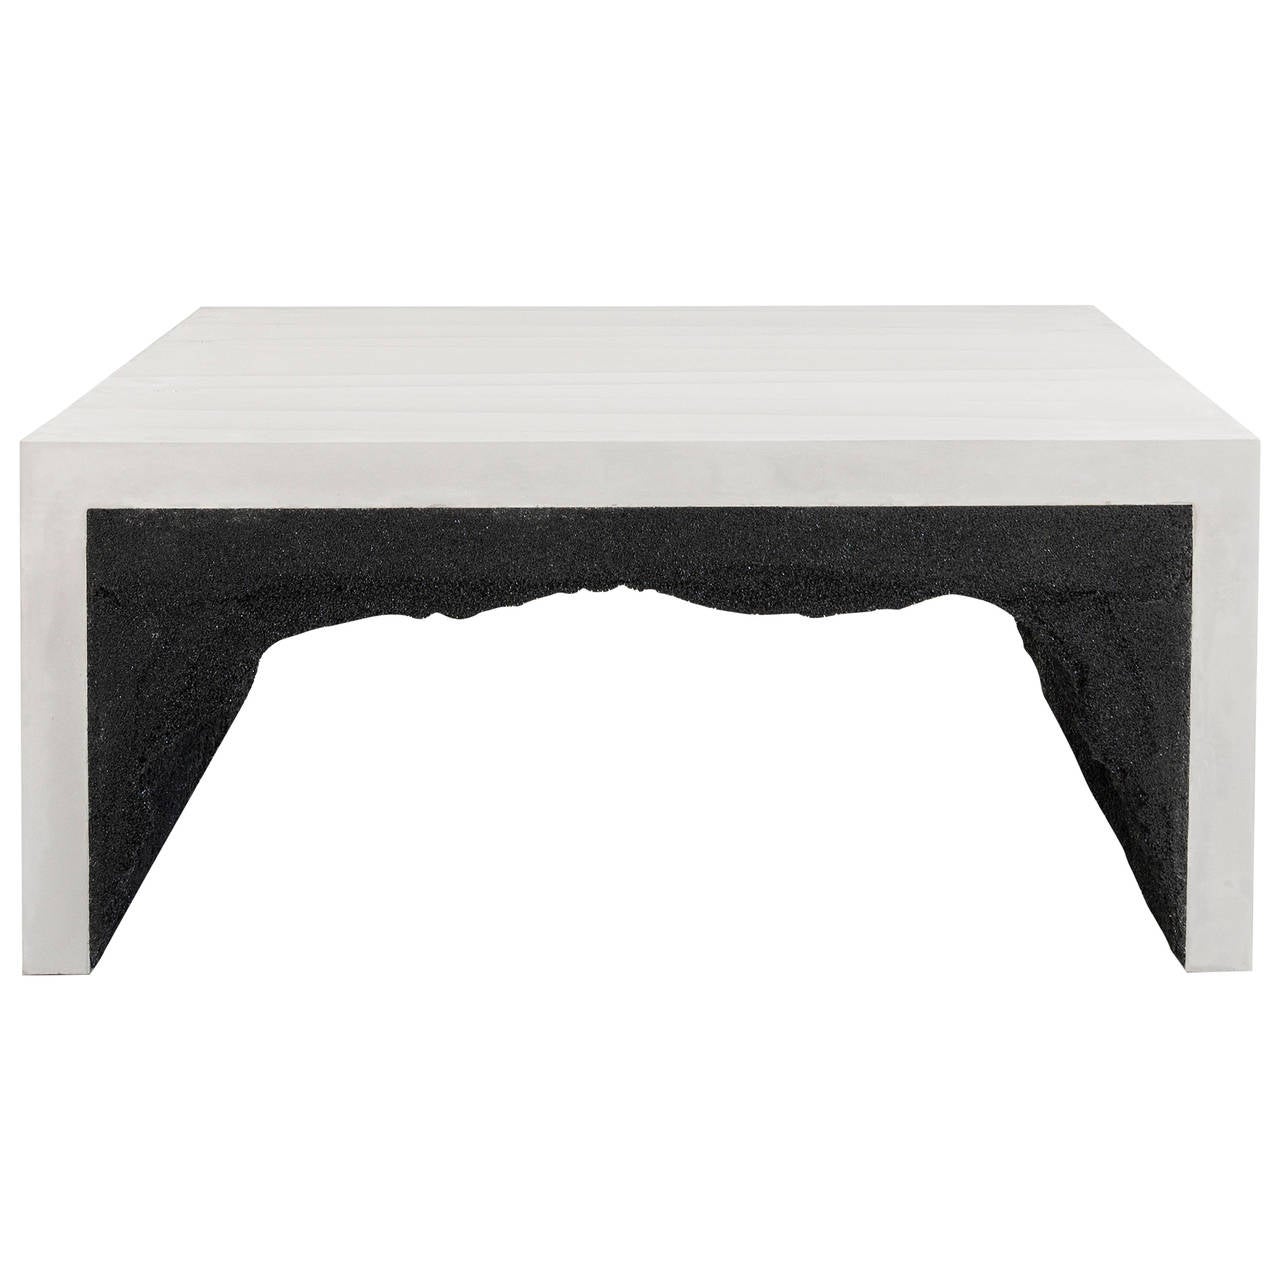 This coffee table consists of a hand-dyed white cement and a black silica interior. The silica is packed by hand within the cement in an organic nature.
Custom options available, please inquire with the studio.